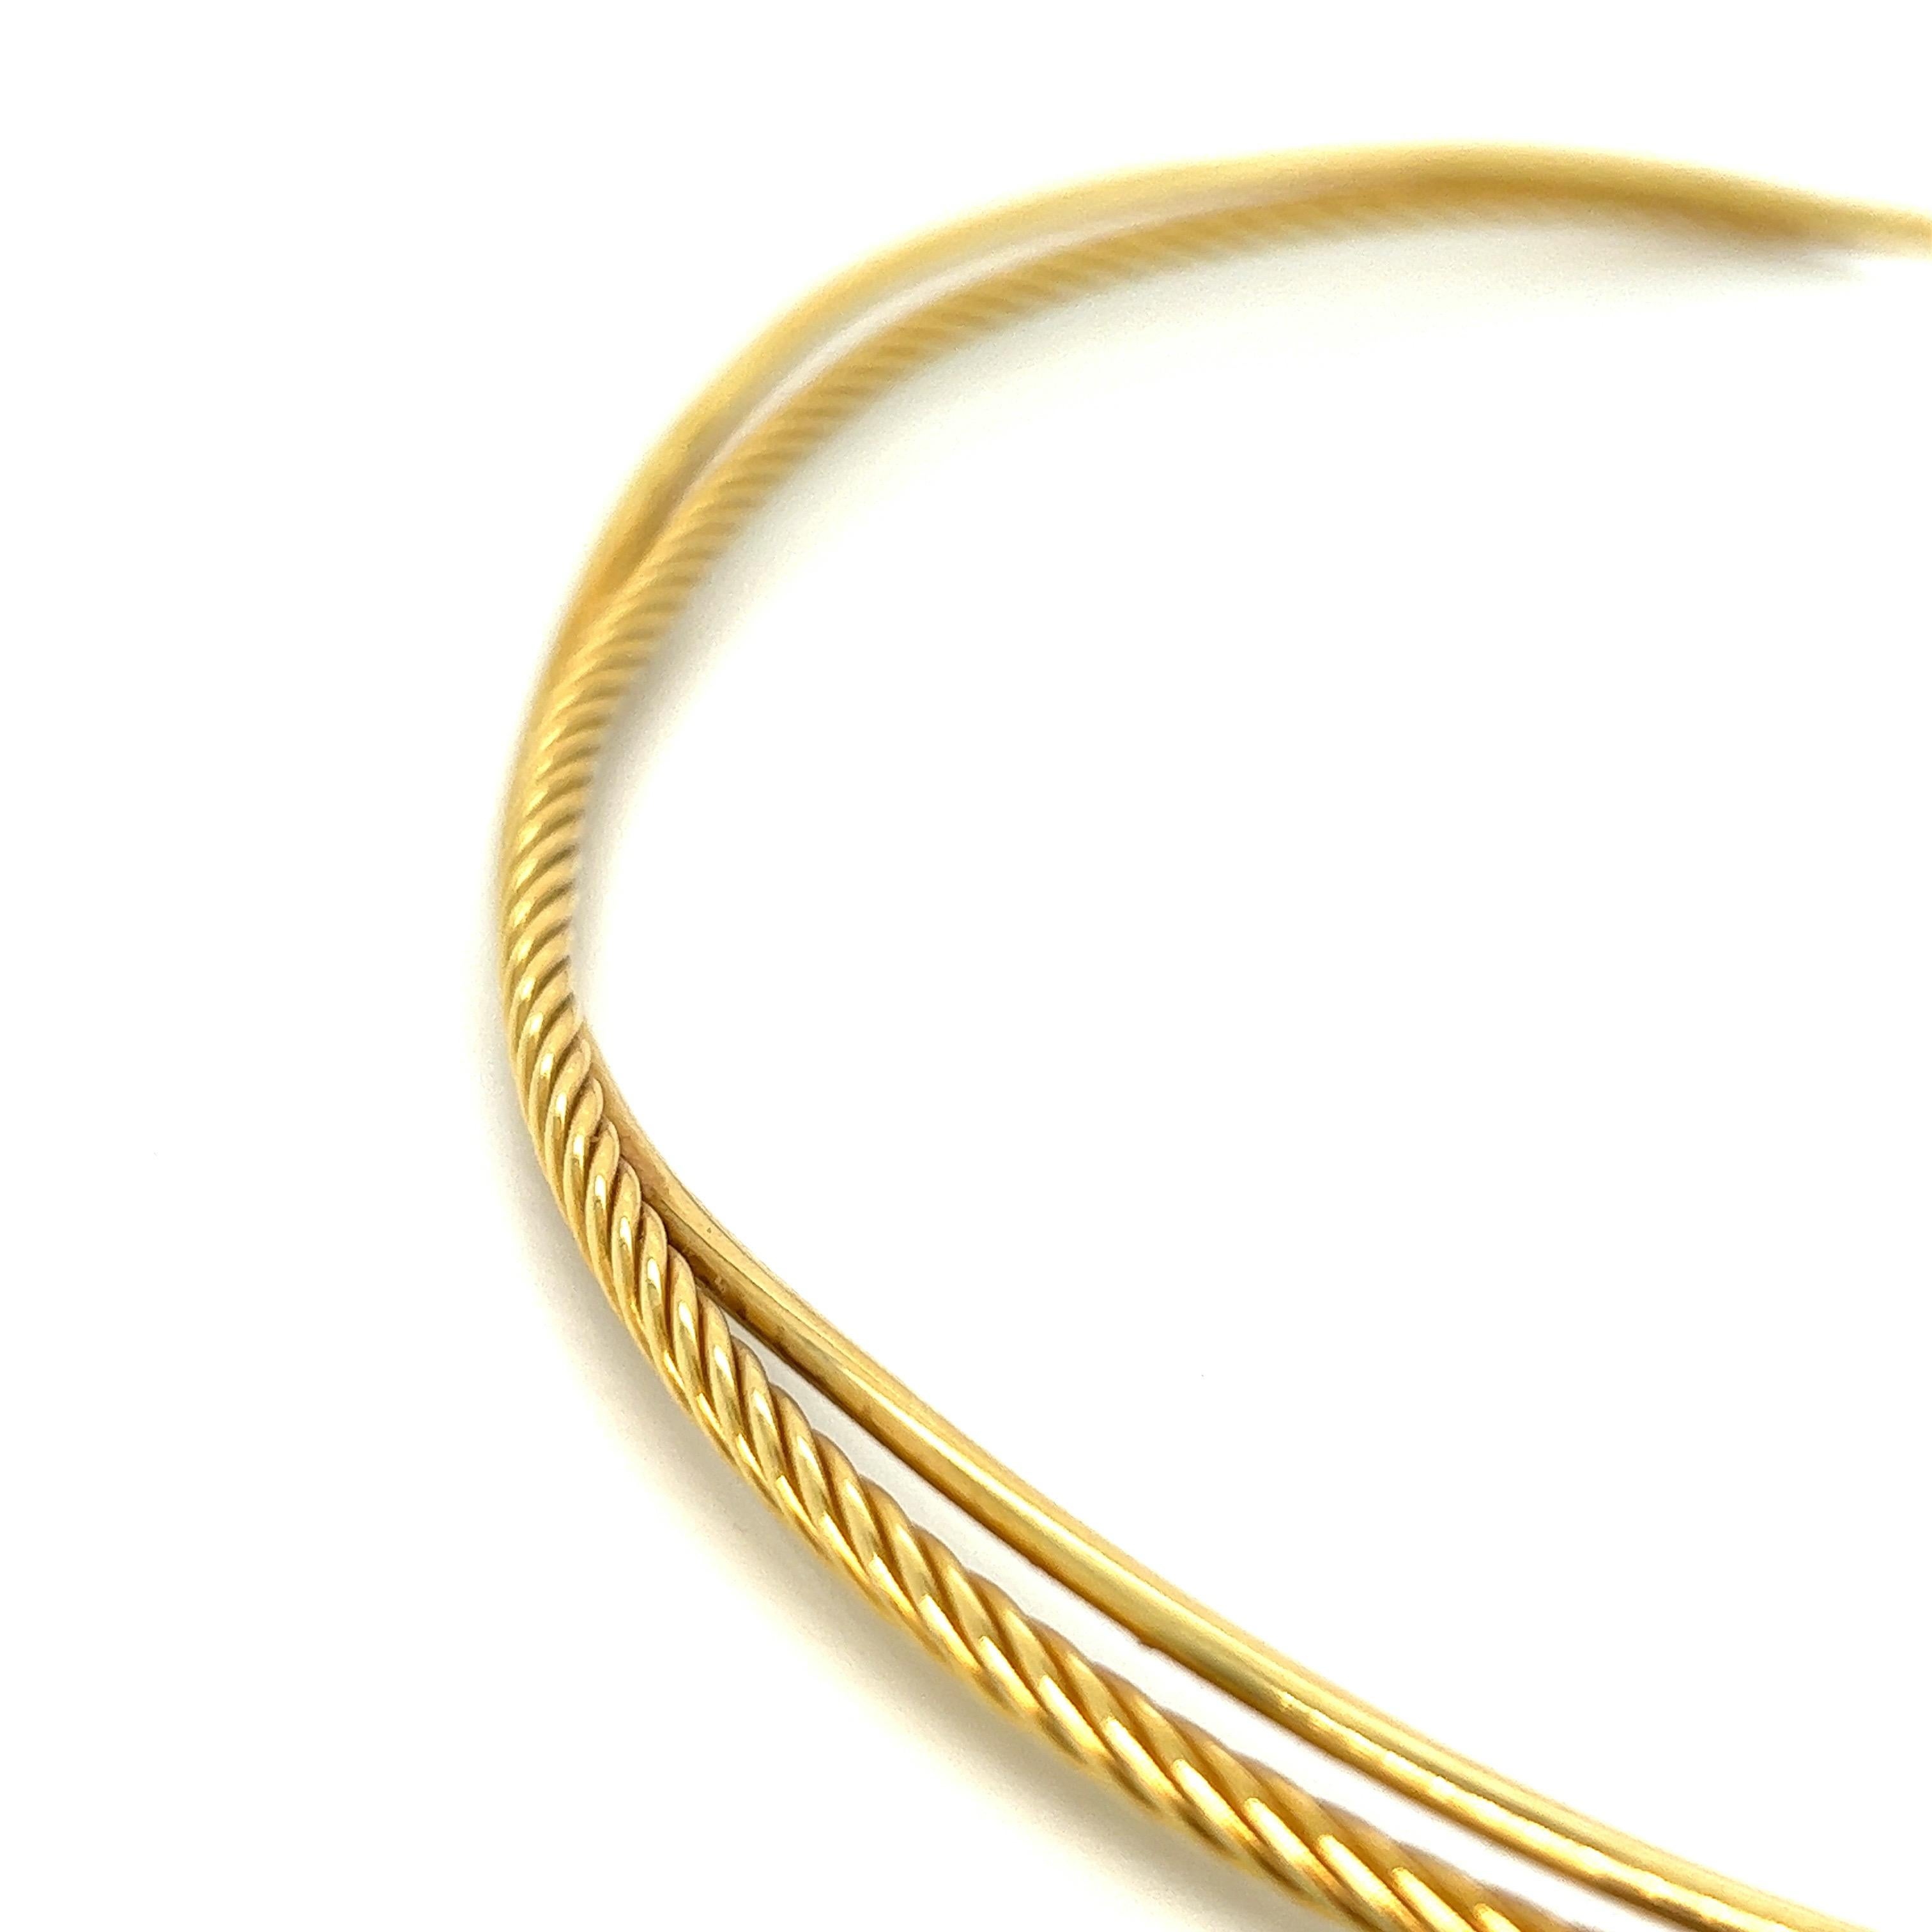 David Yurman gold collar necklace 

Twisted strand wrapped by another untwisted strand, 18 karat yellow gold; marked DY, 750

Inner circumference: 14.25 inches
Total weight: 22.3 grams